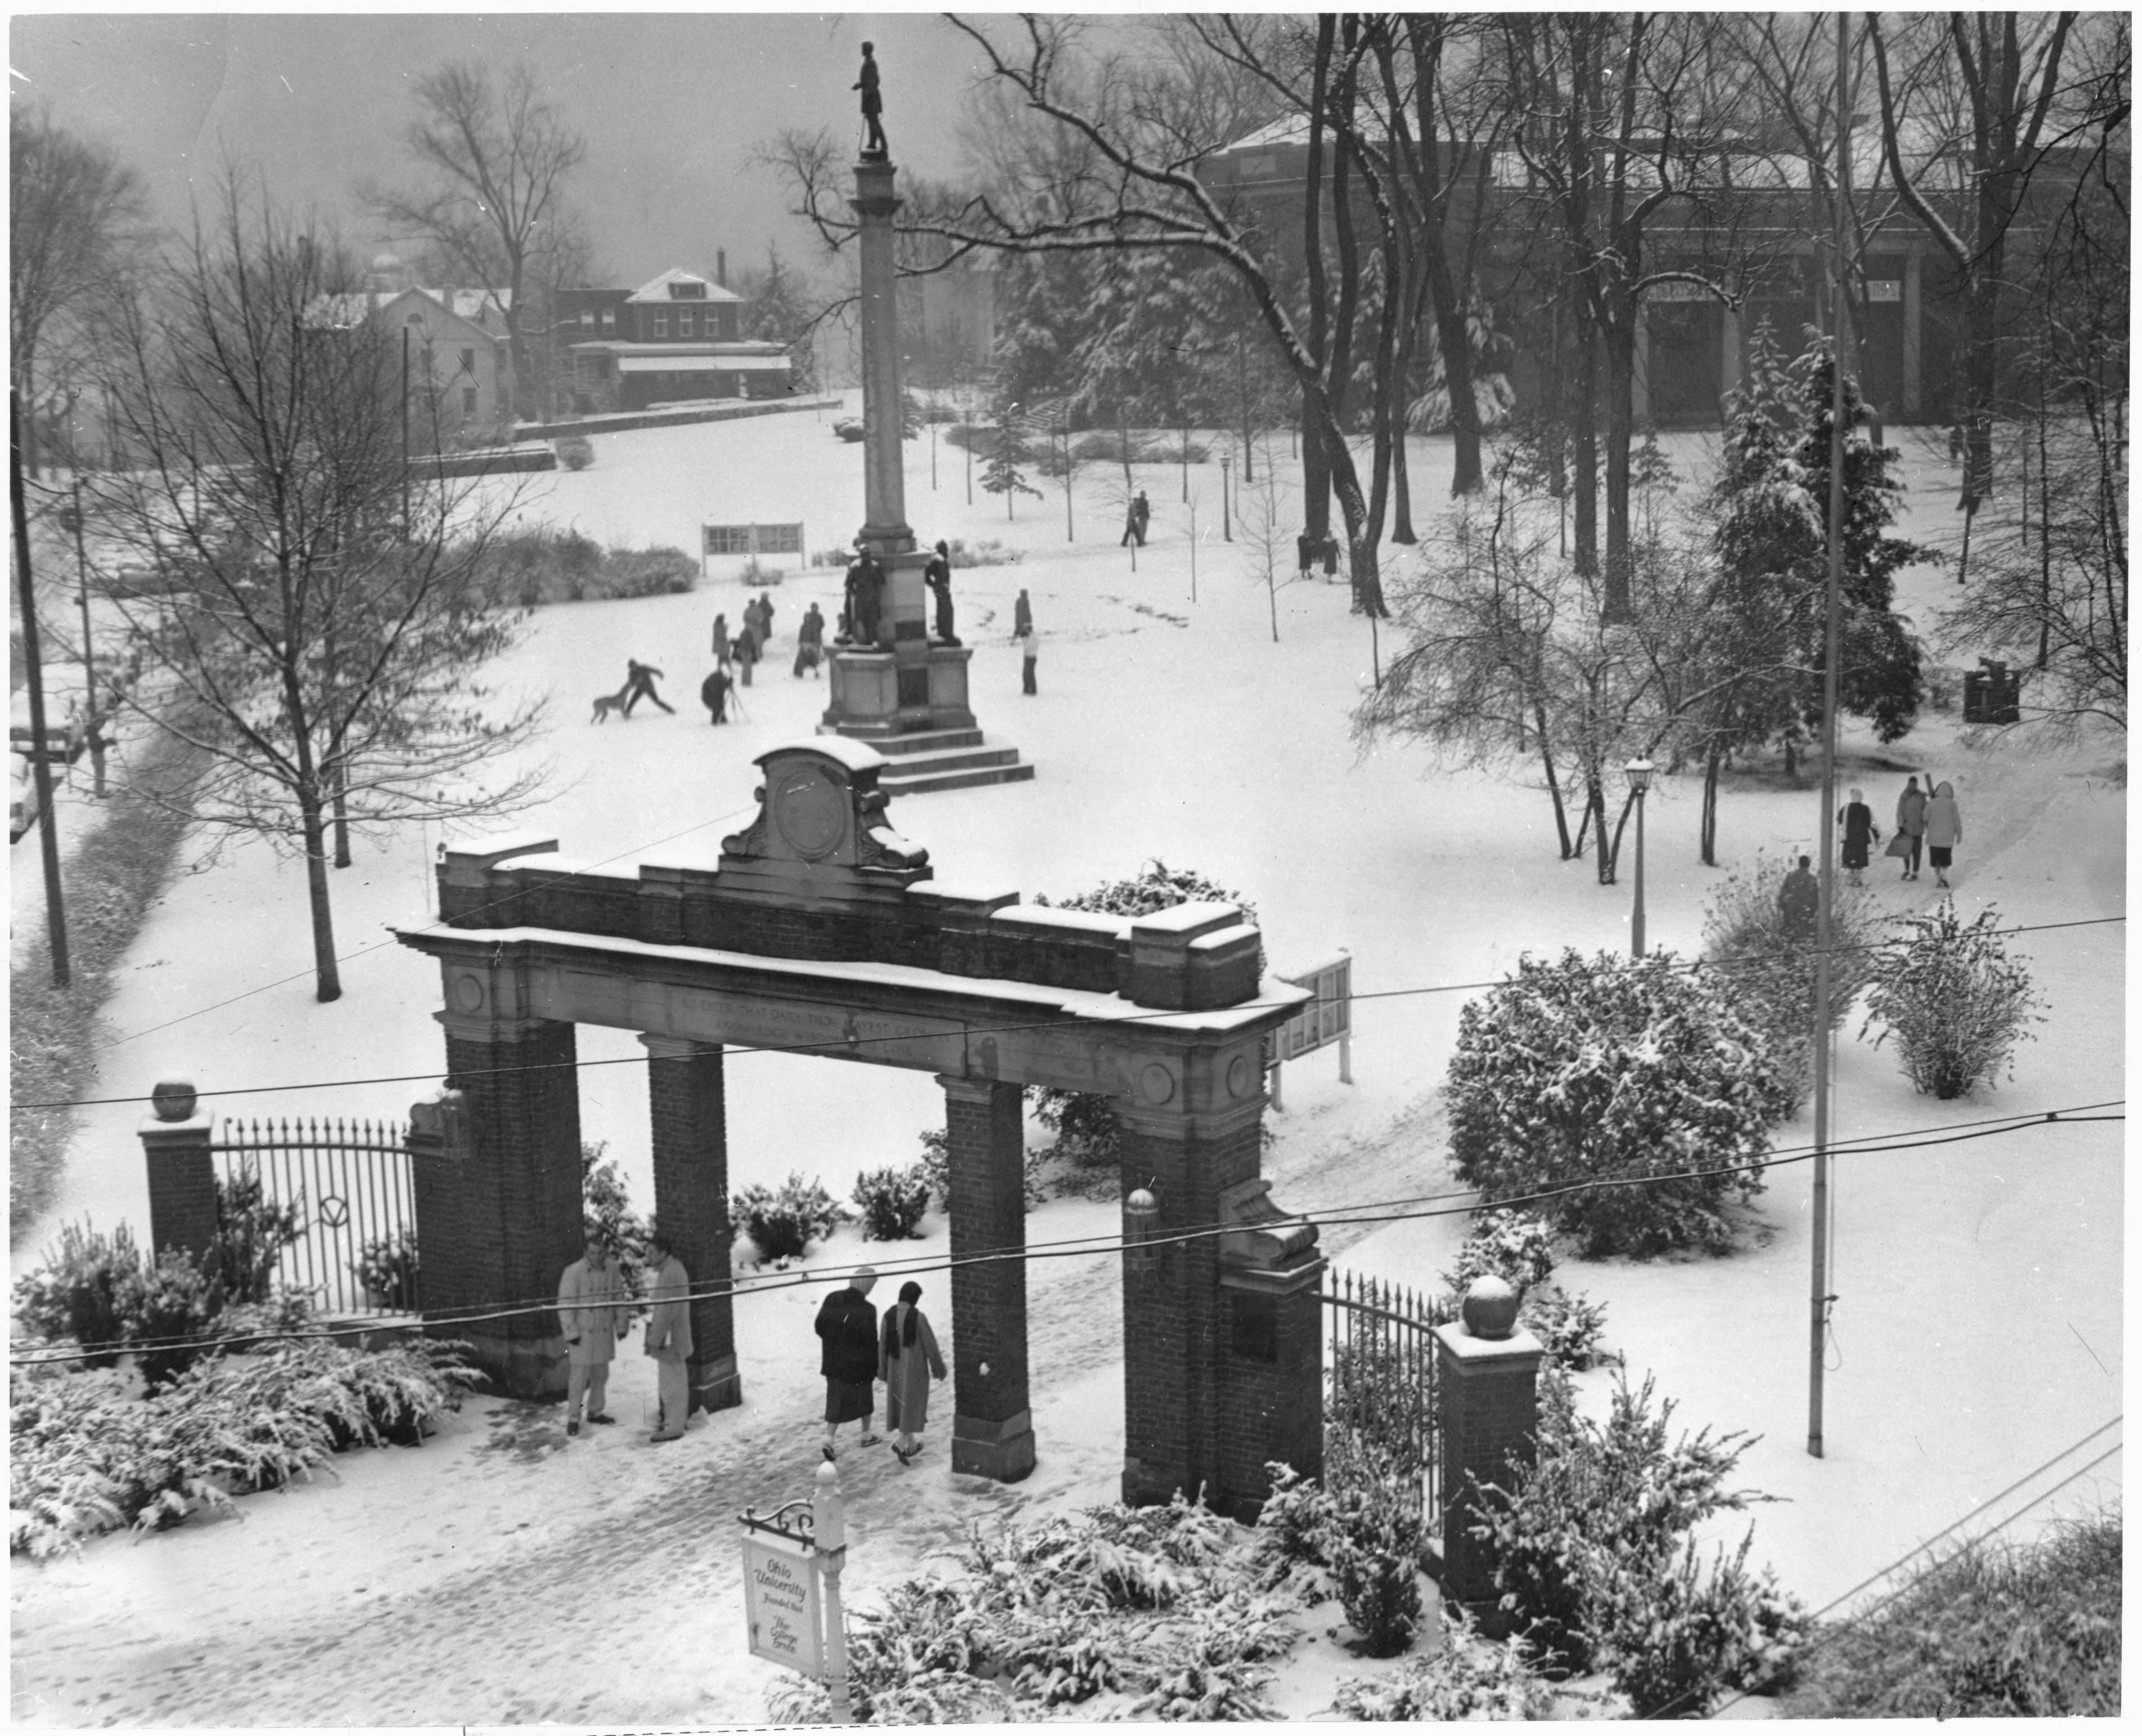 College Green covered in snow in the 1940's